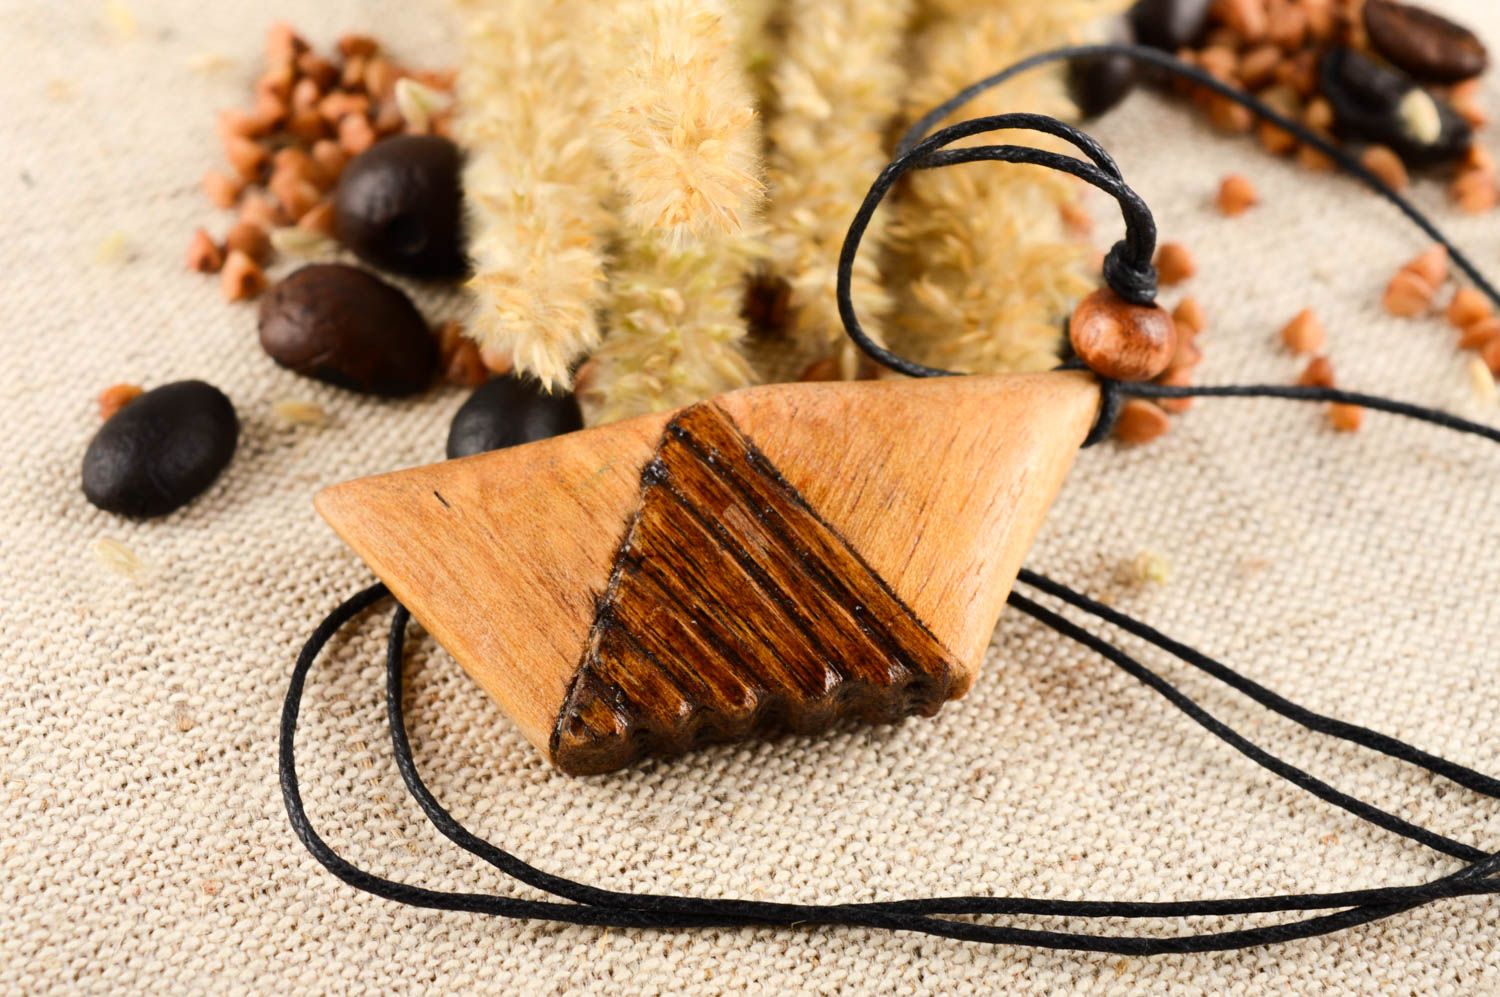 Stylish handmade wooden pendant artisan jewelry designs wood craft gifts for her photo 1